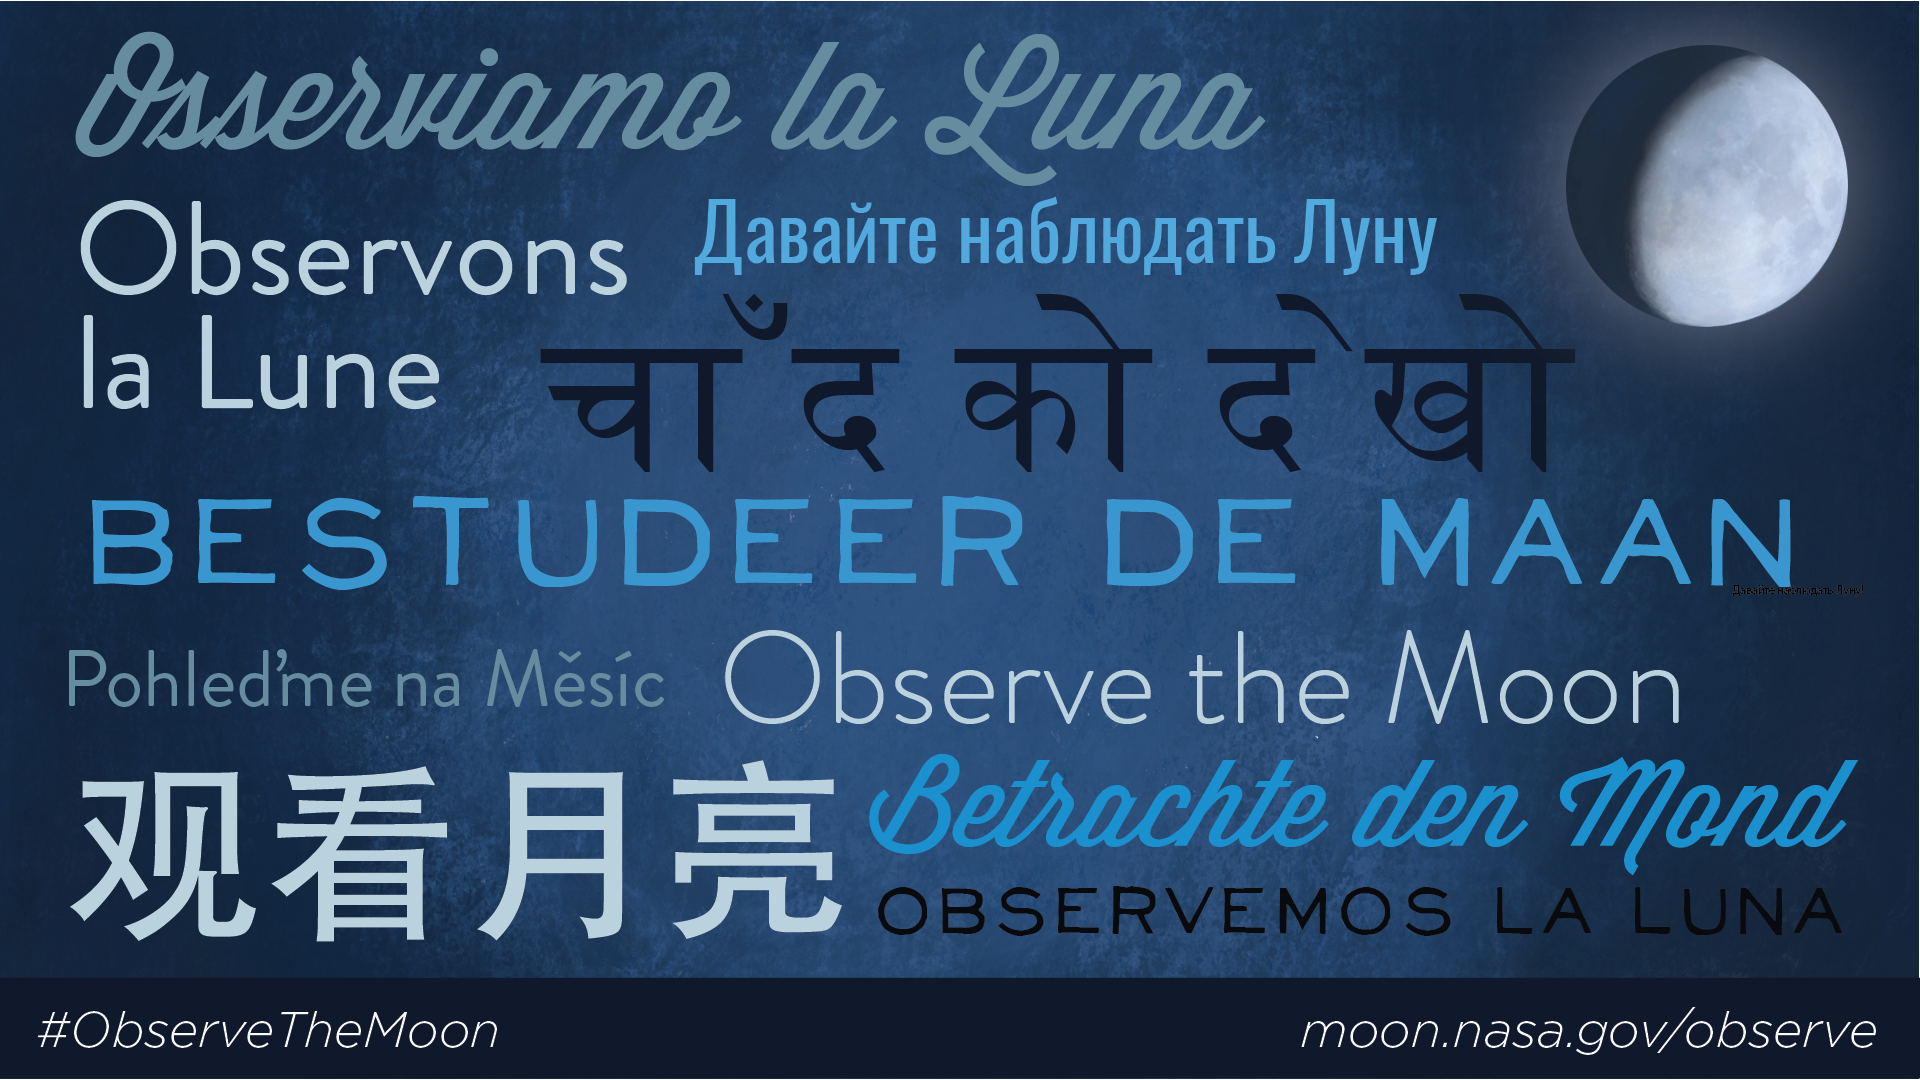 Observe the Moon written in many languages